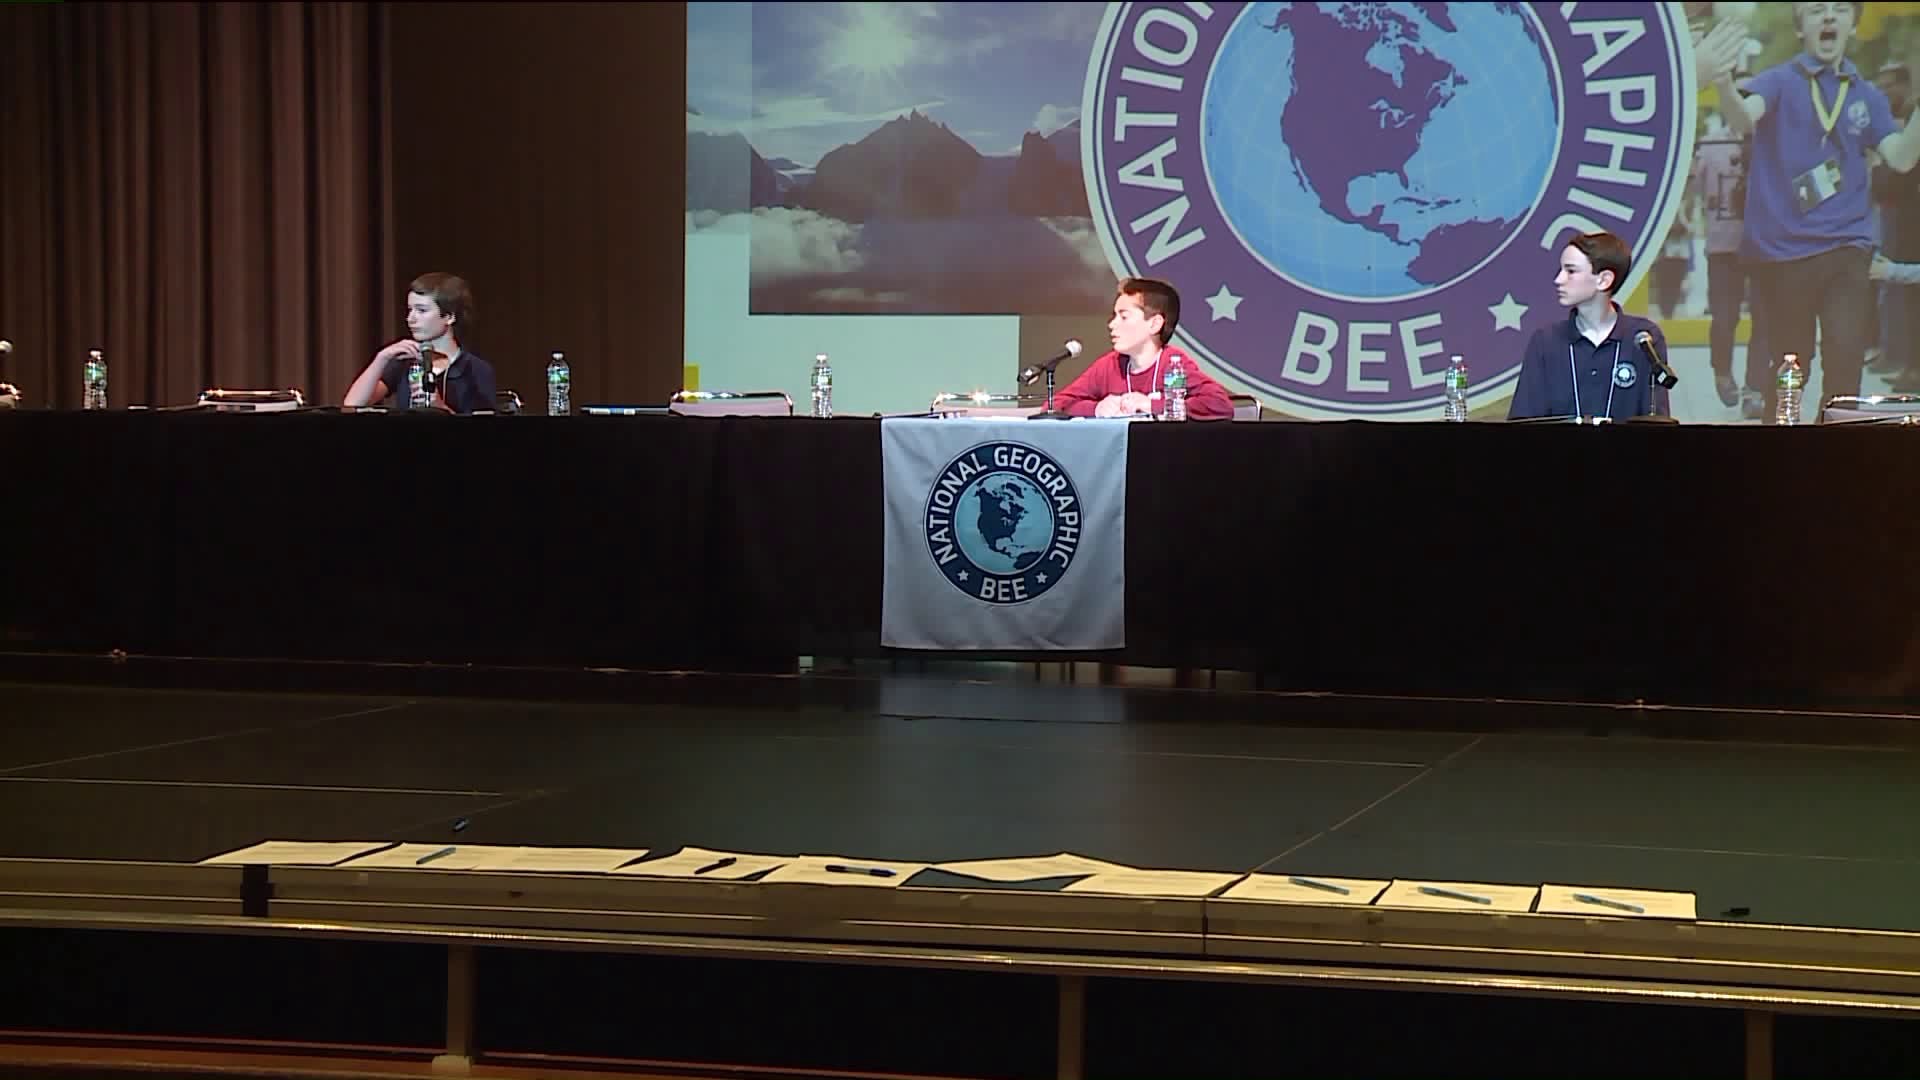 State Geographic Bee tests skills in New Britain